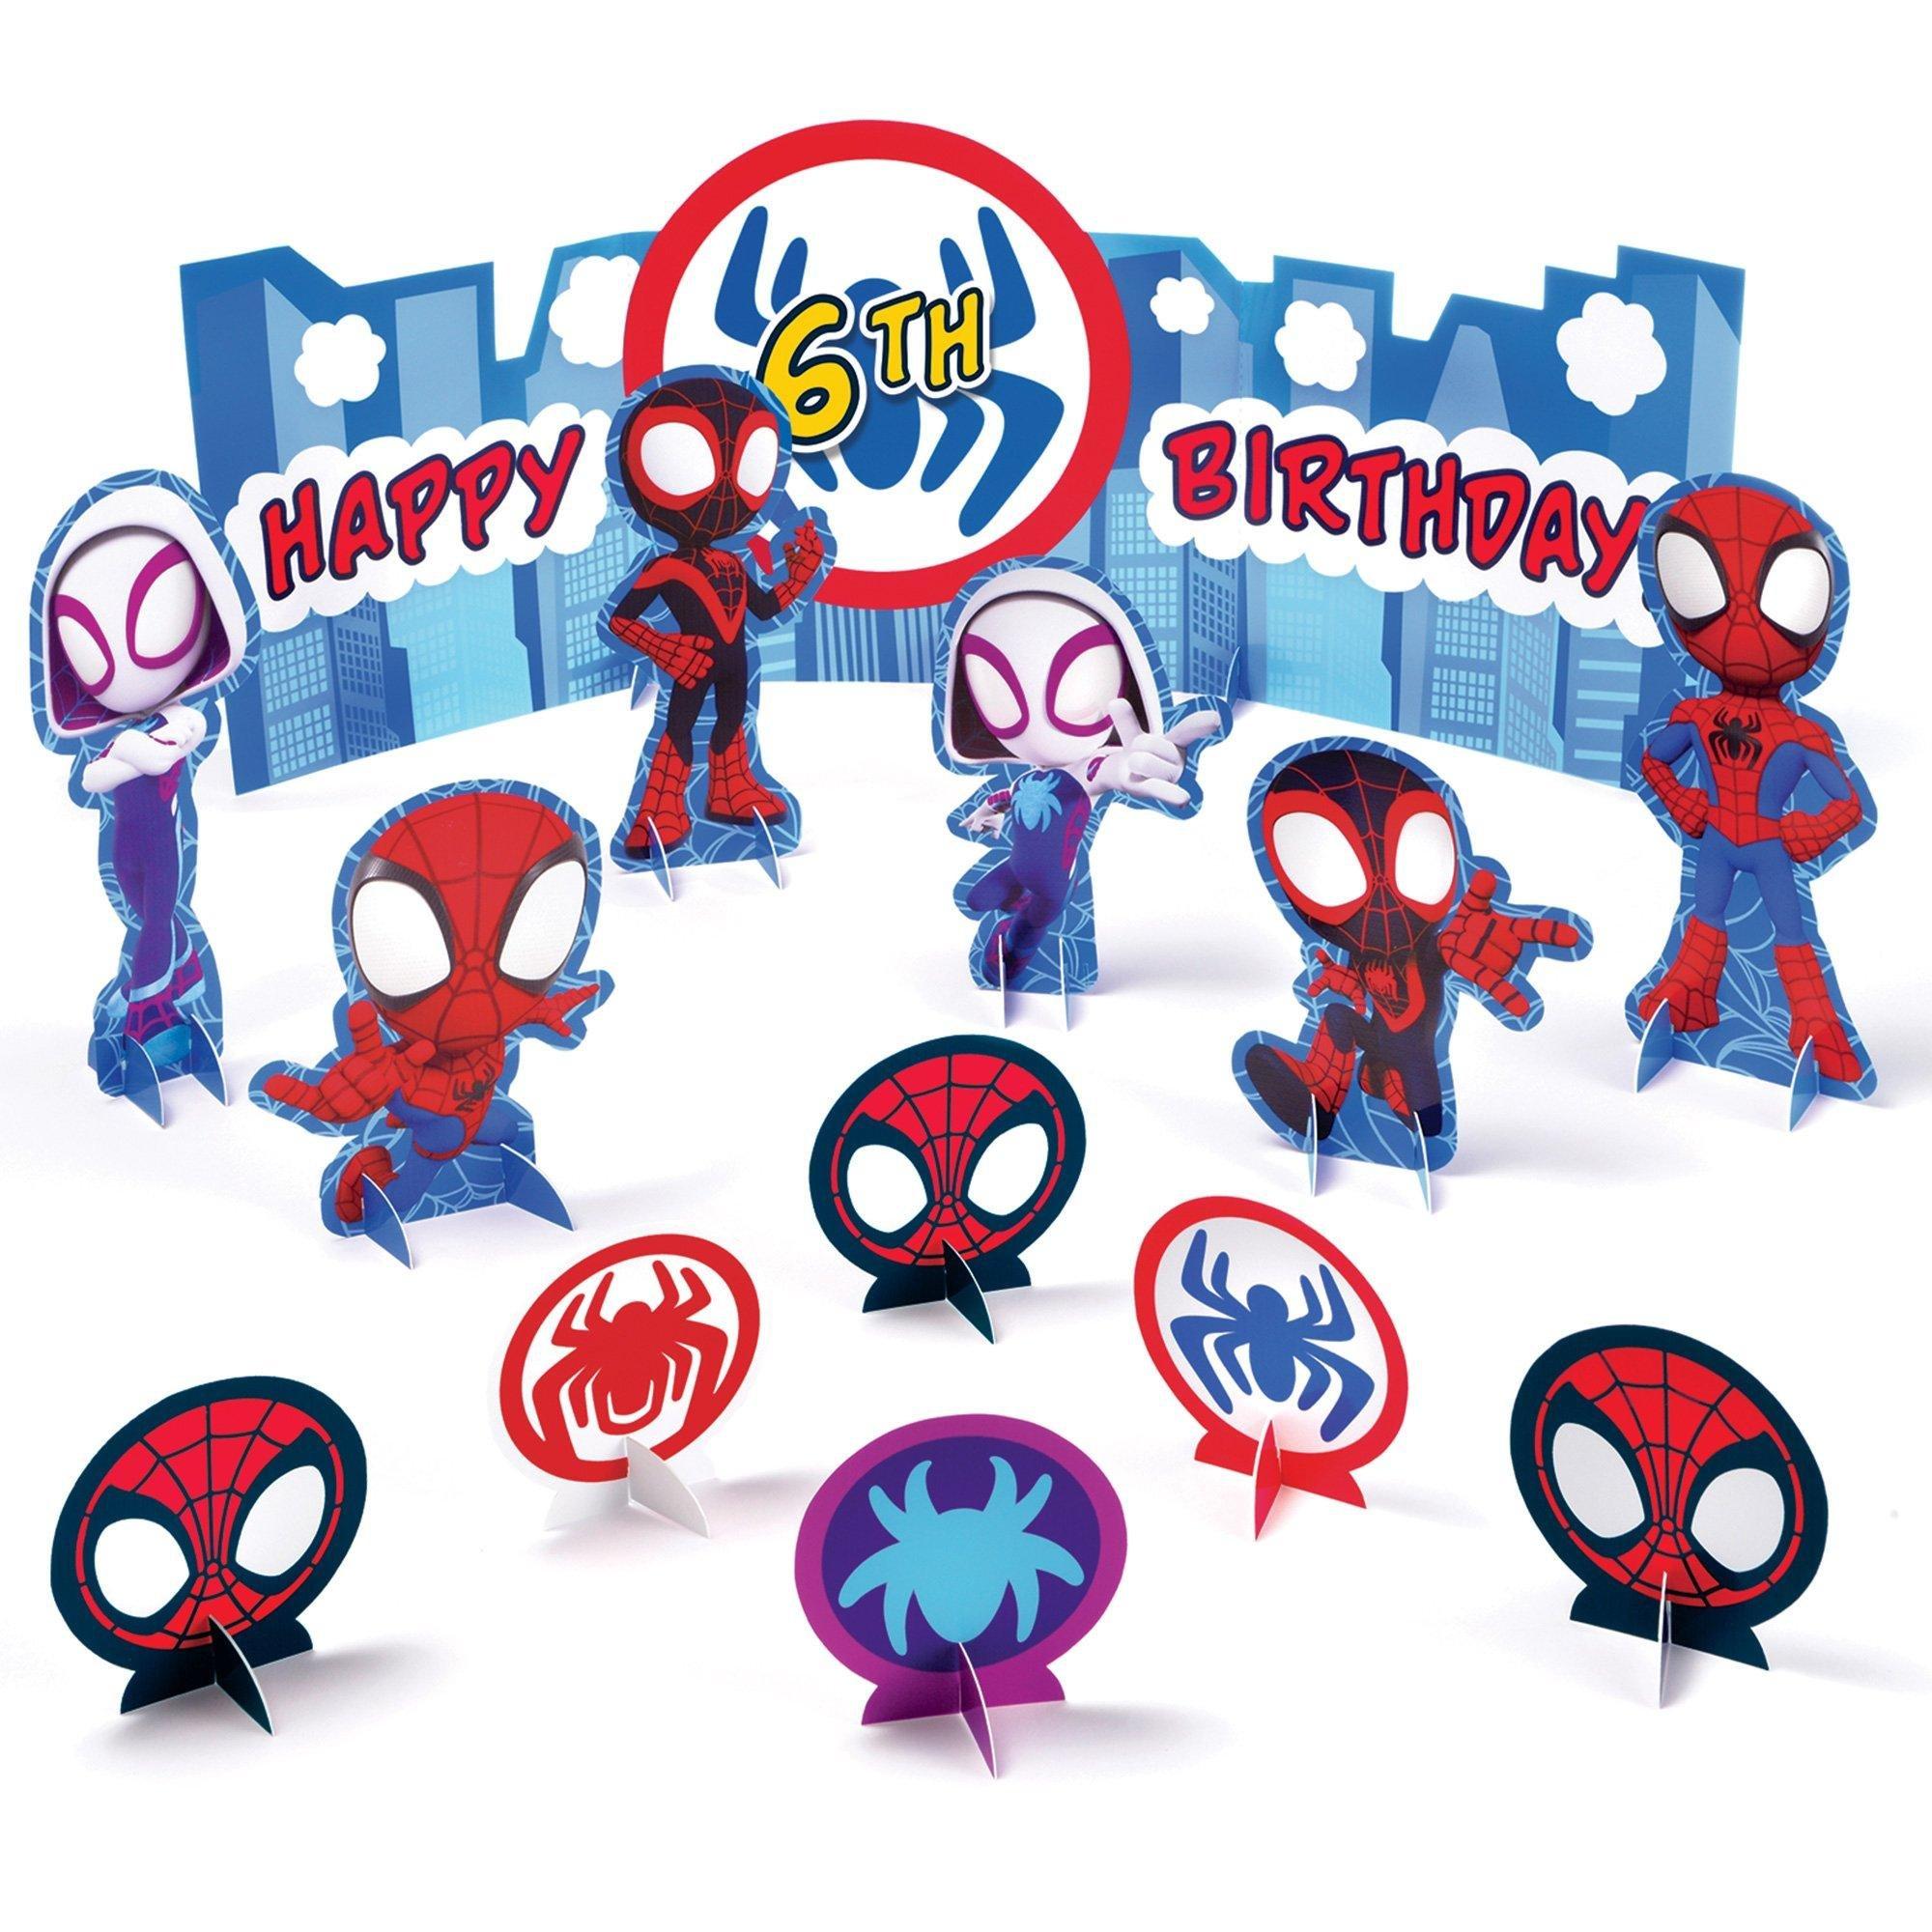 Spidey & His Amazing Friends Party Decorating Supplies Pack - Kit Includes Letter Banners, Themed Latex Balloons, Table Decorations, Scene Setter & Photo Booth Props